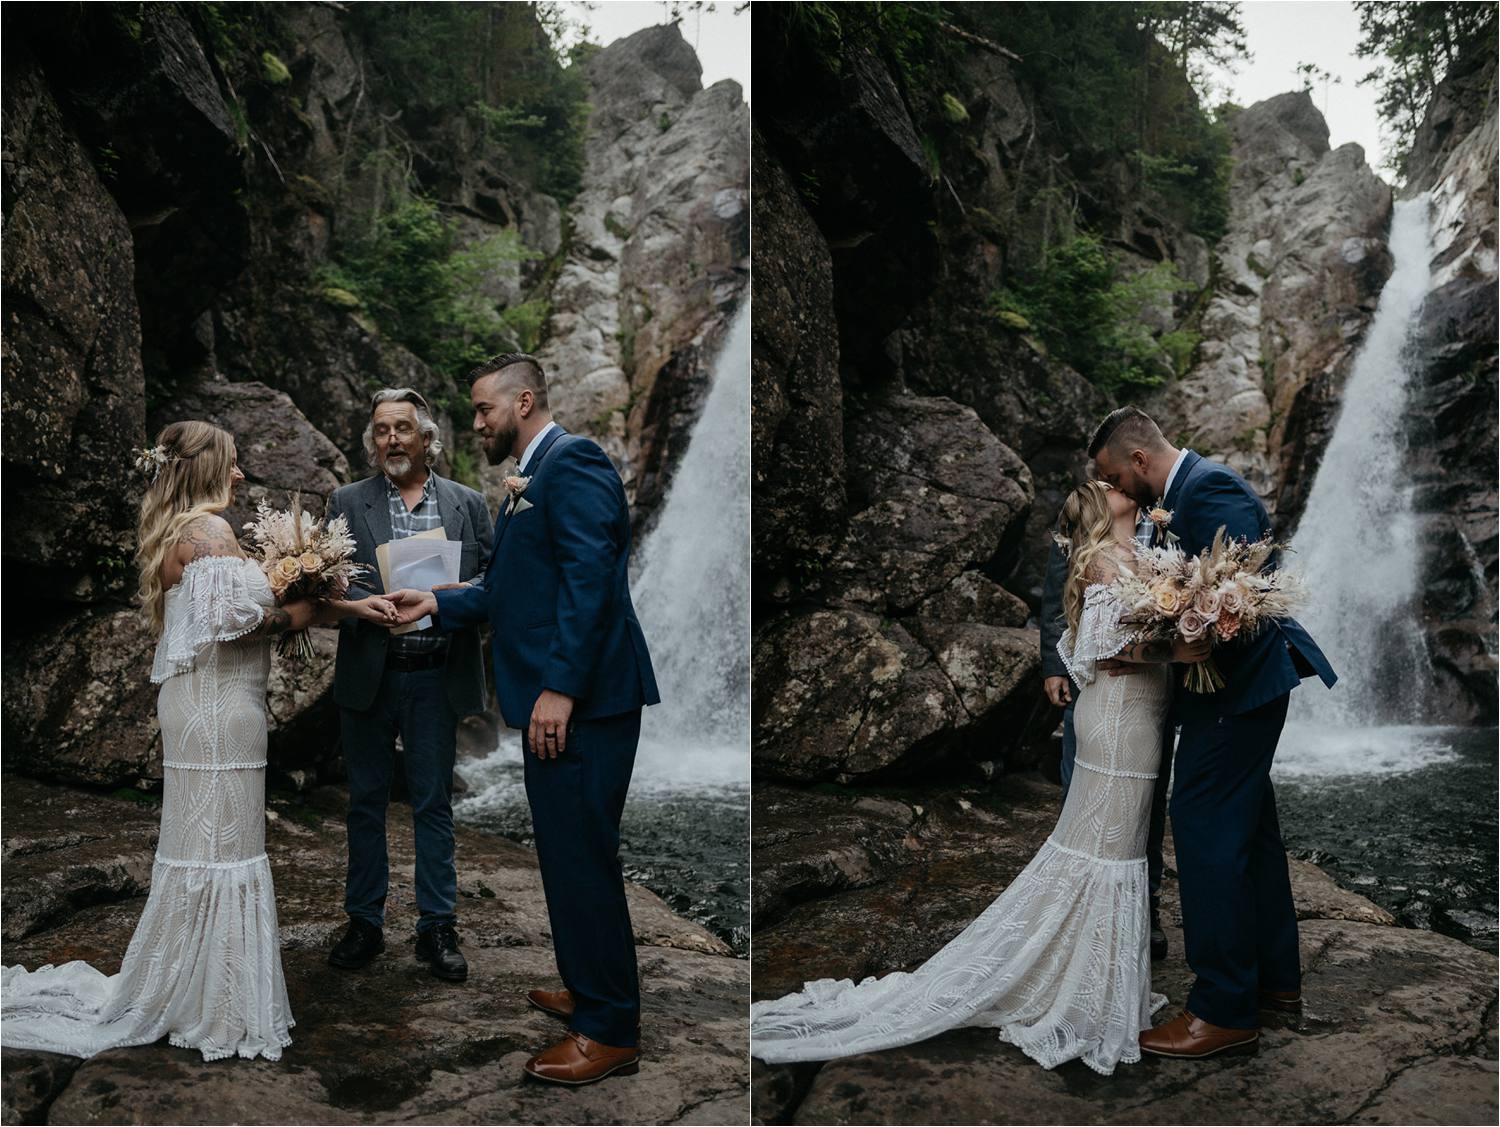 Boho Bride and groom first kiss in front of Glen Ellis Falls